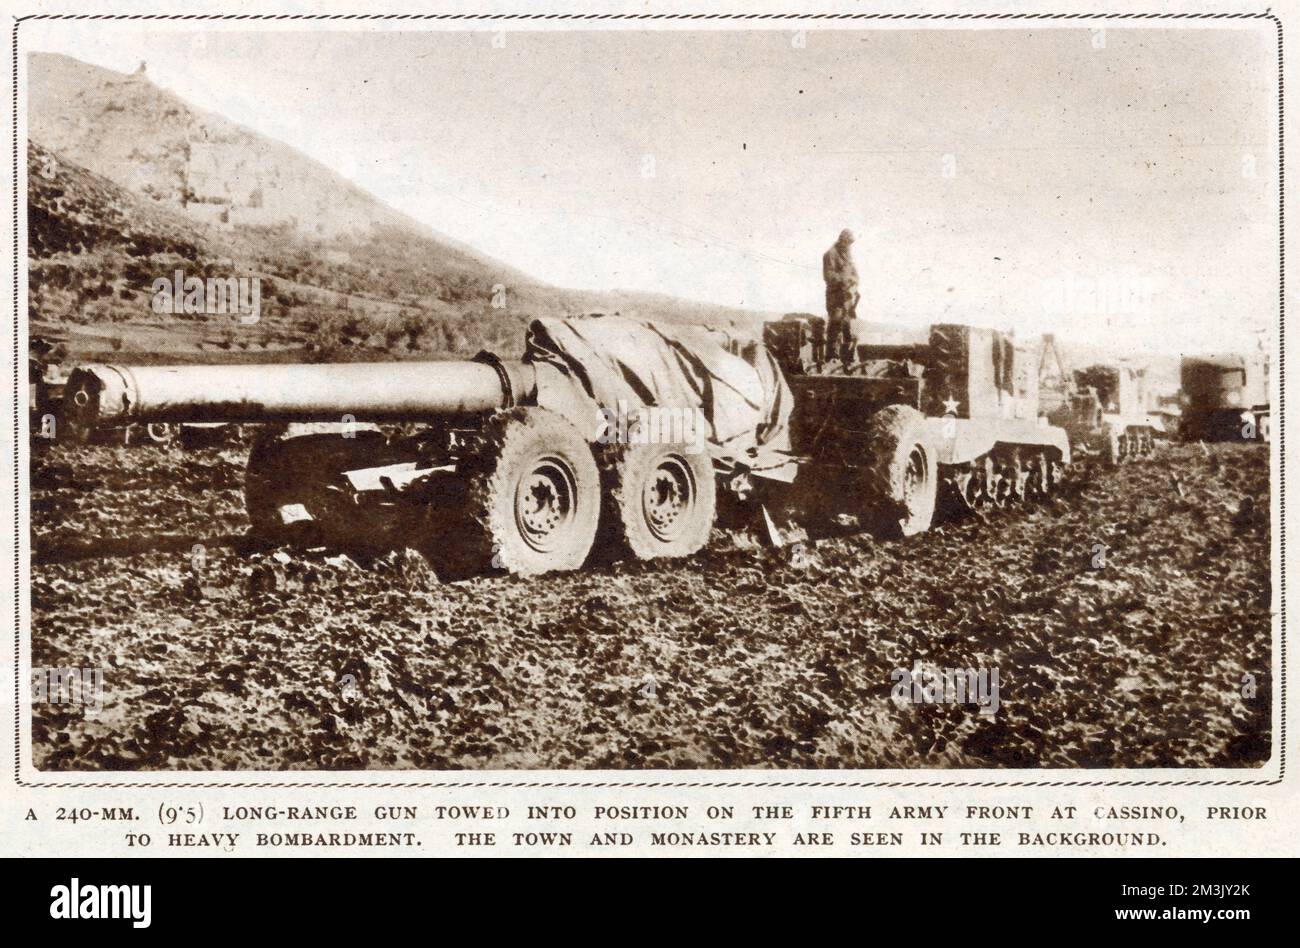 Photograph showing a 240mm long range gun being towed into position on the Allied Fifth Army front near Cassino, February 1944.  Between January and May 1944 the town of Cassino and Benedictine monastery of Monte Cassino were completely destroyed as the Allied Fifth Army attempted to push the occupying Nazi troops out of their strong defensive position in the area. Stock Photo